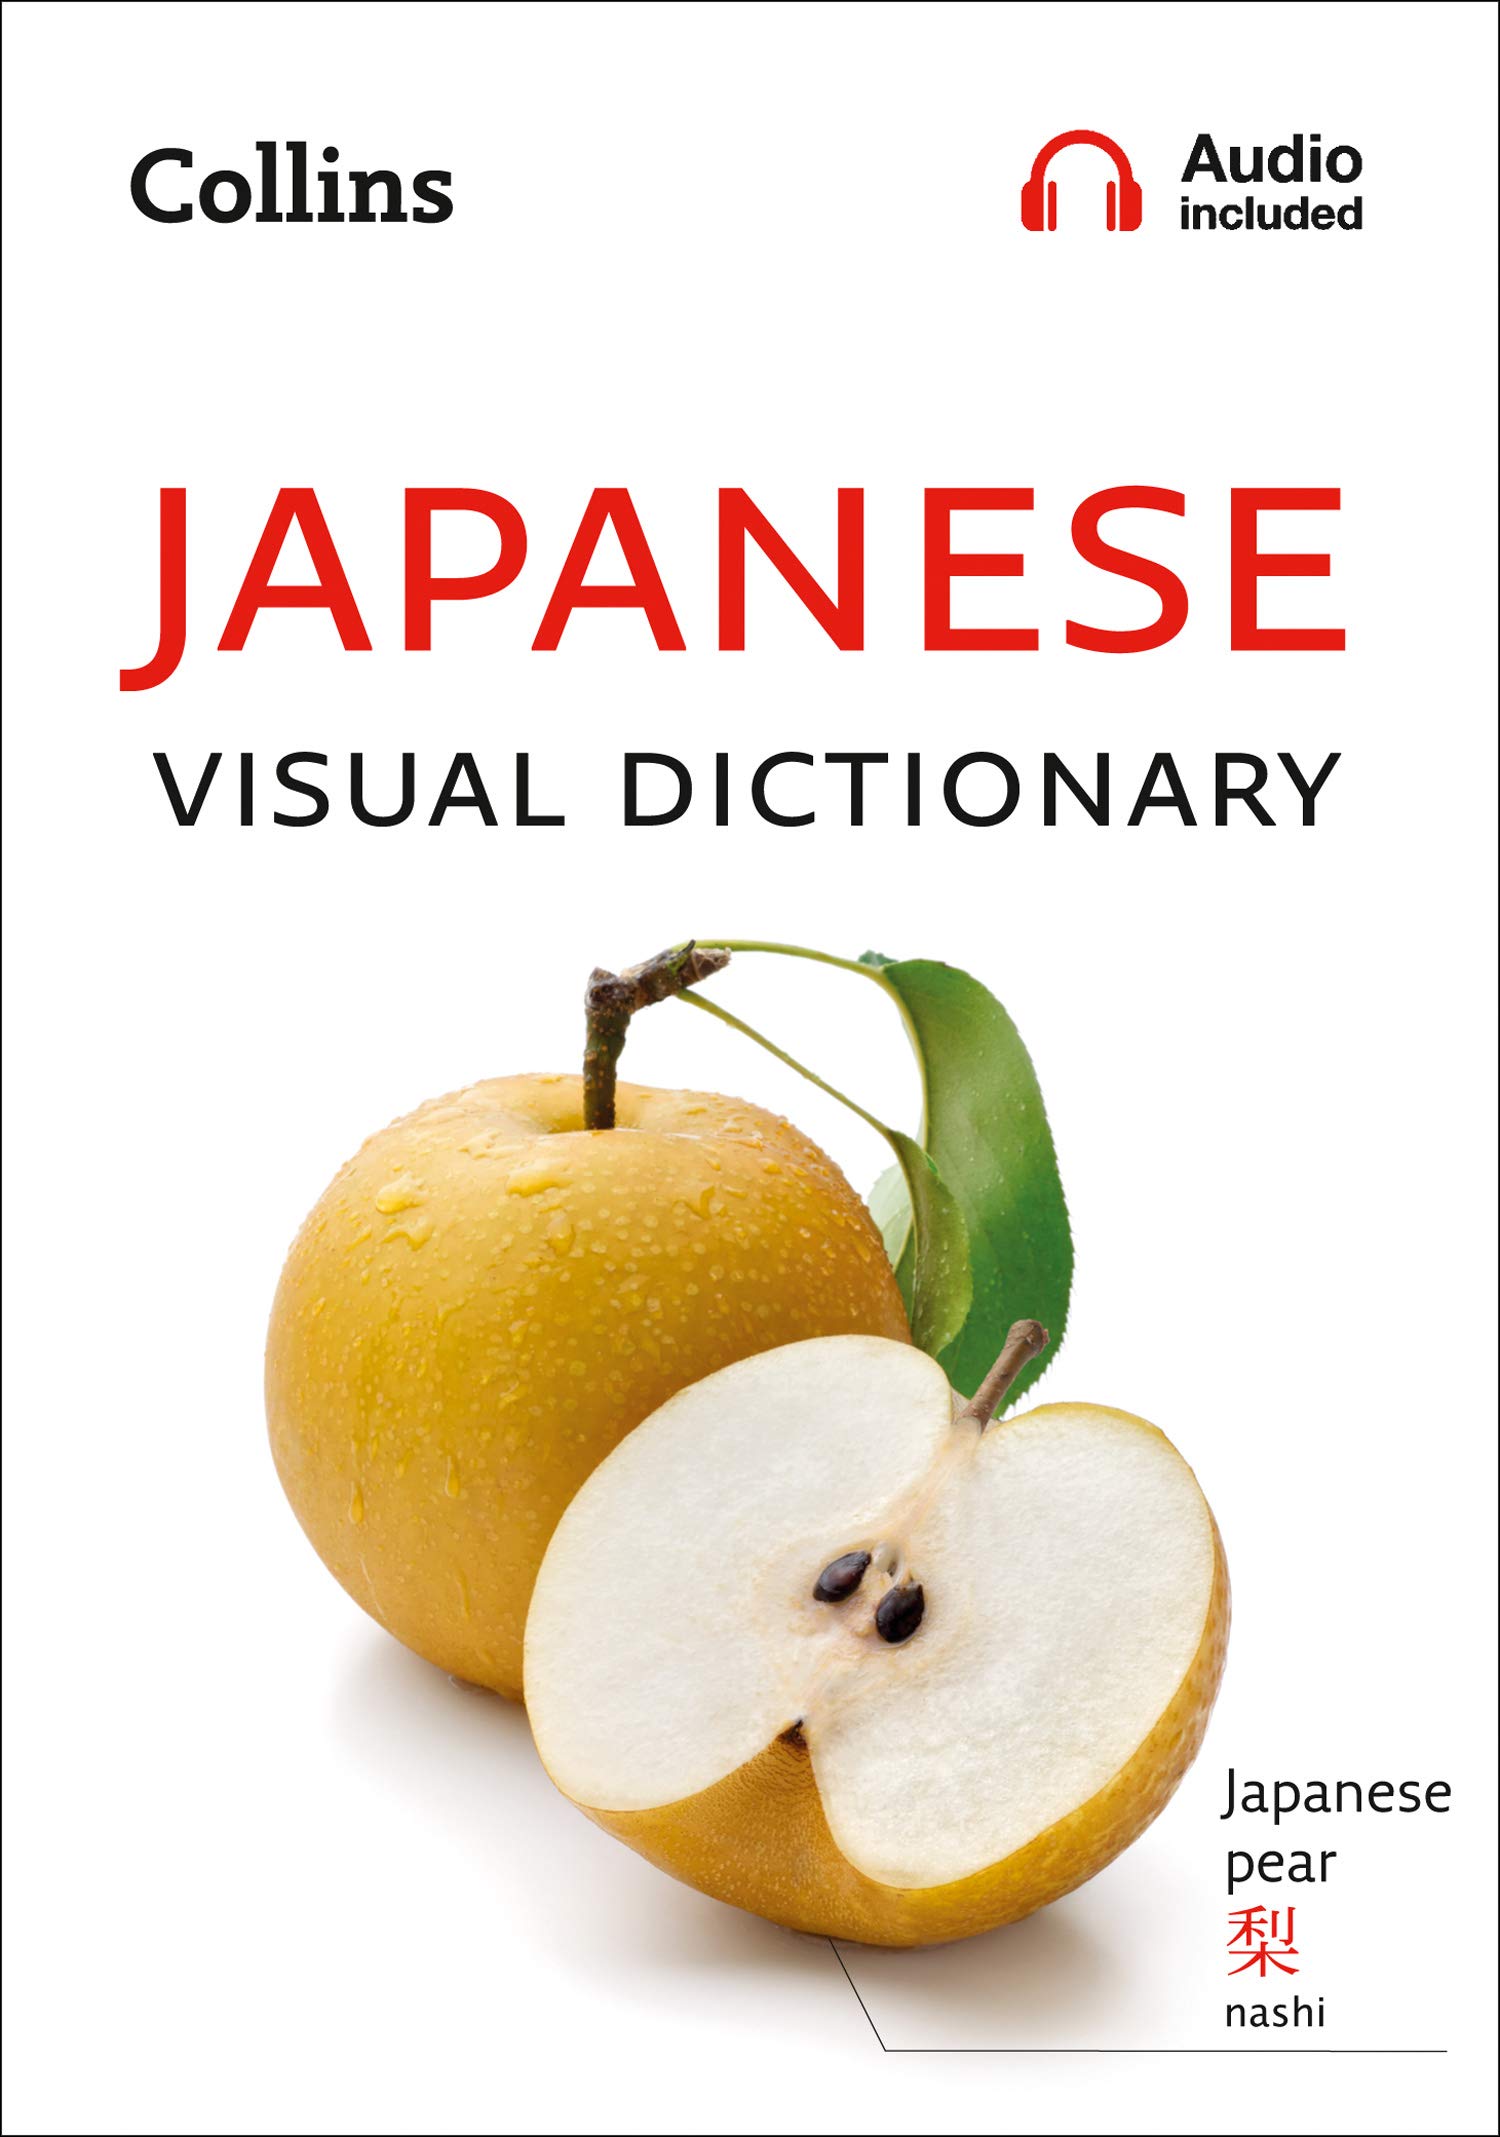 JAPANESE VISUAL DICTIONARY by DK Today